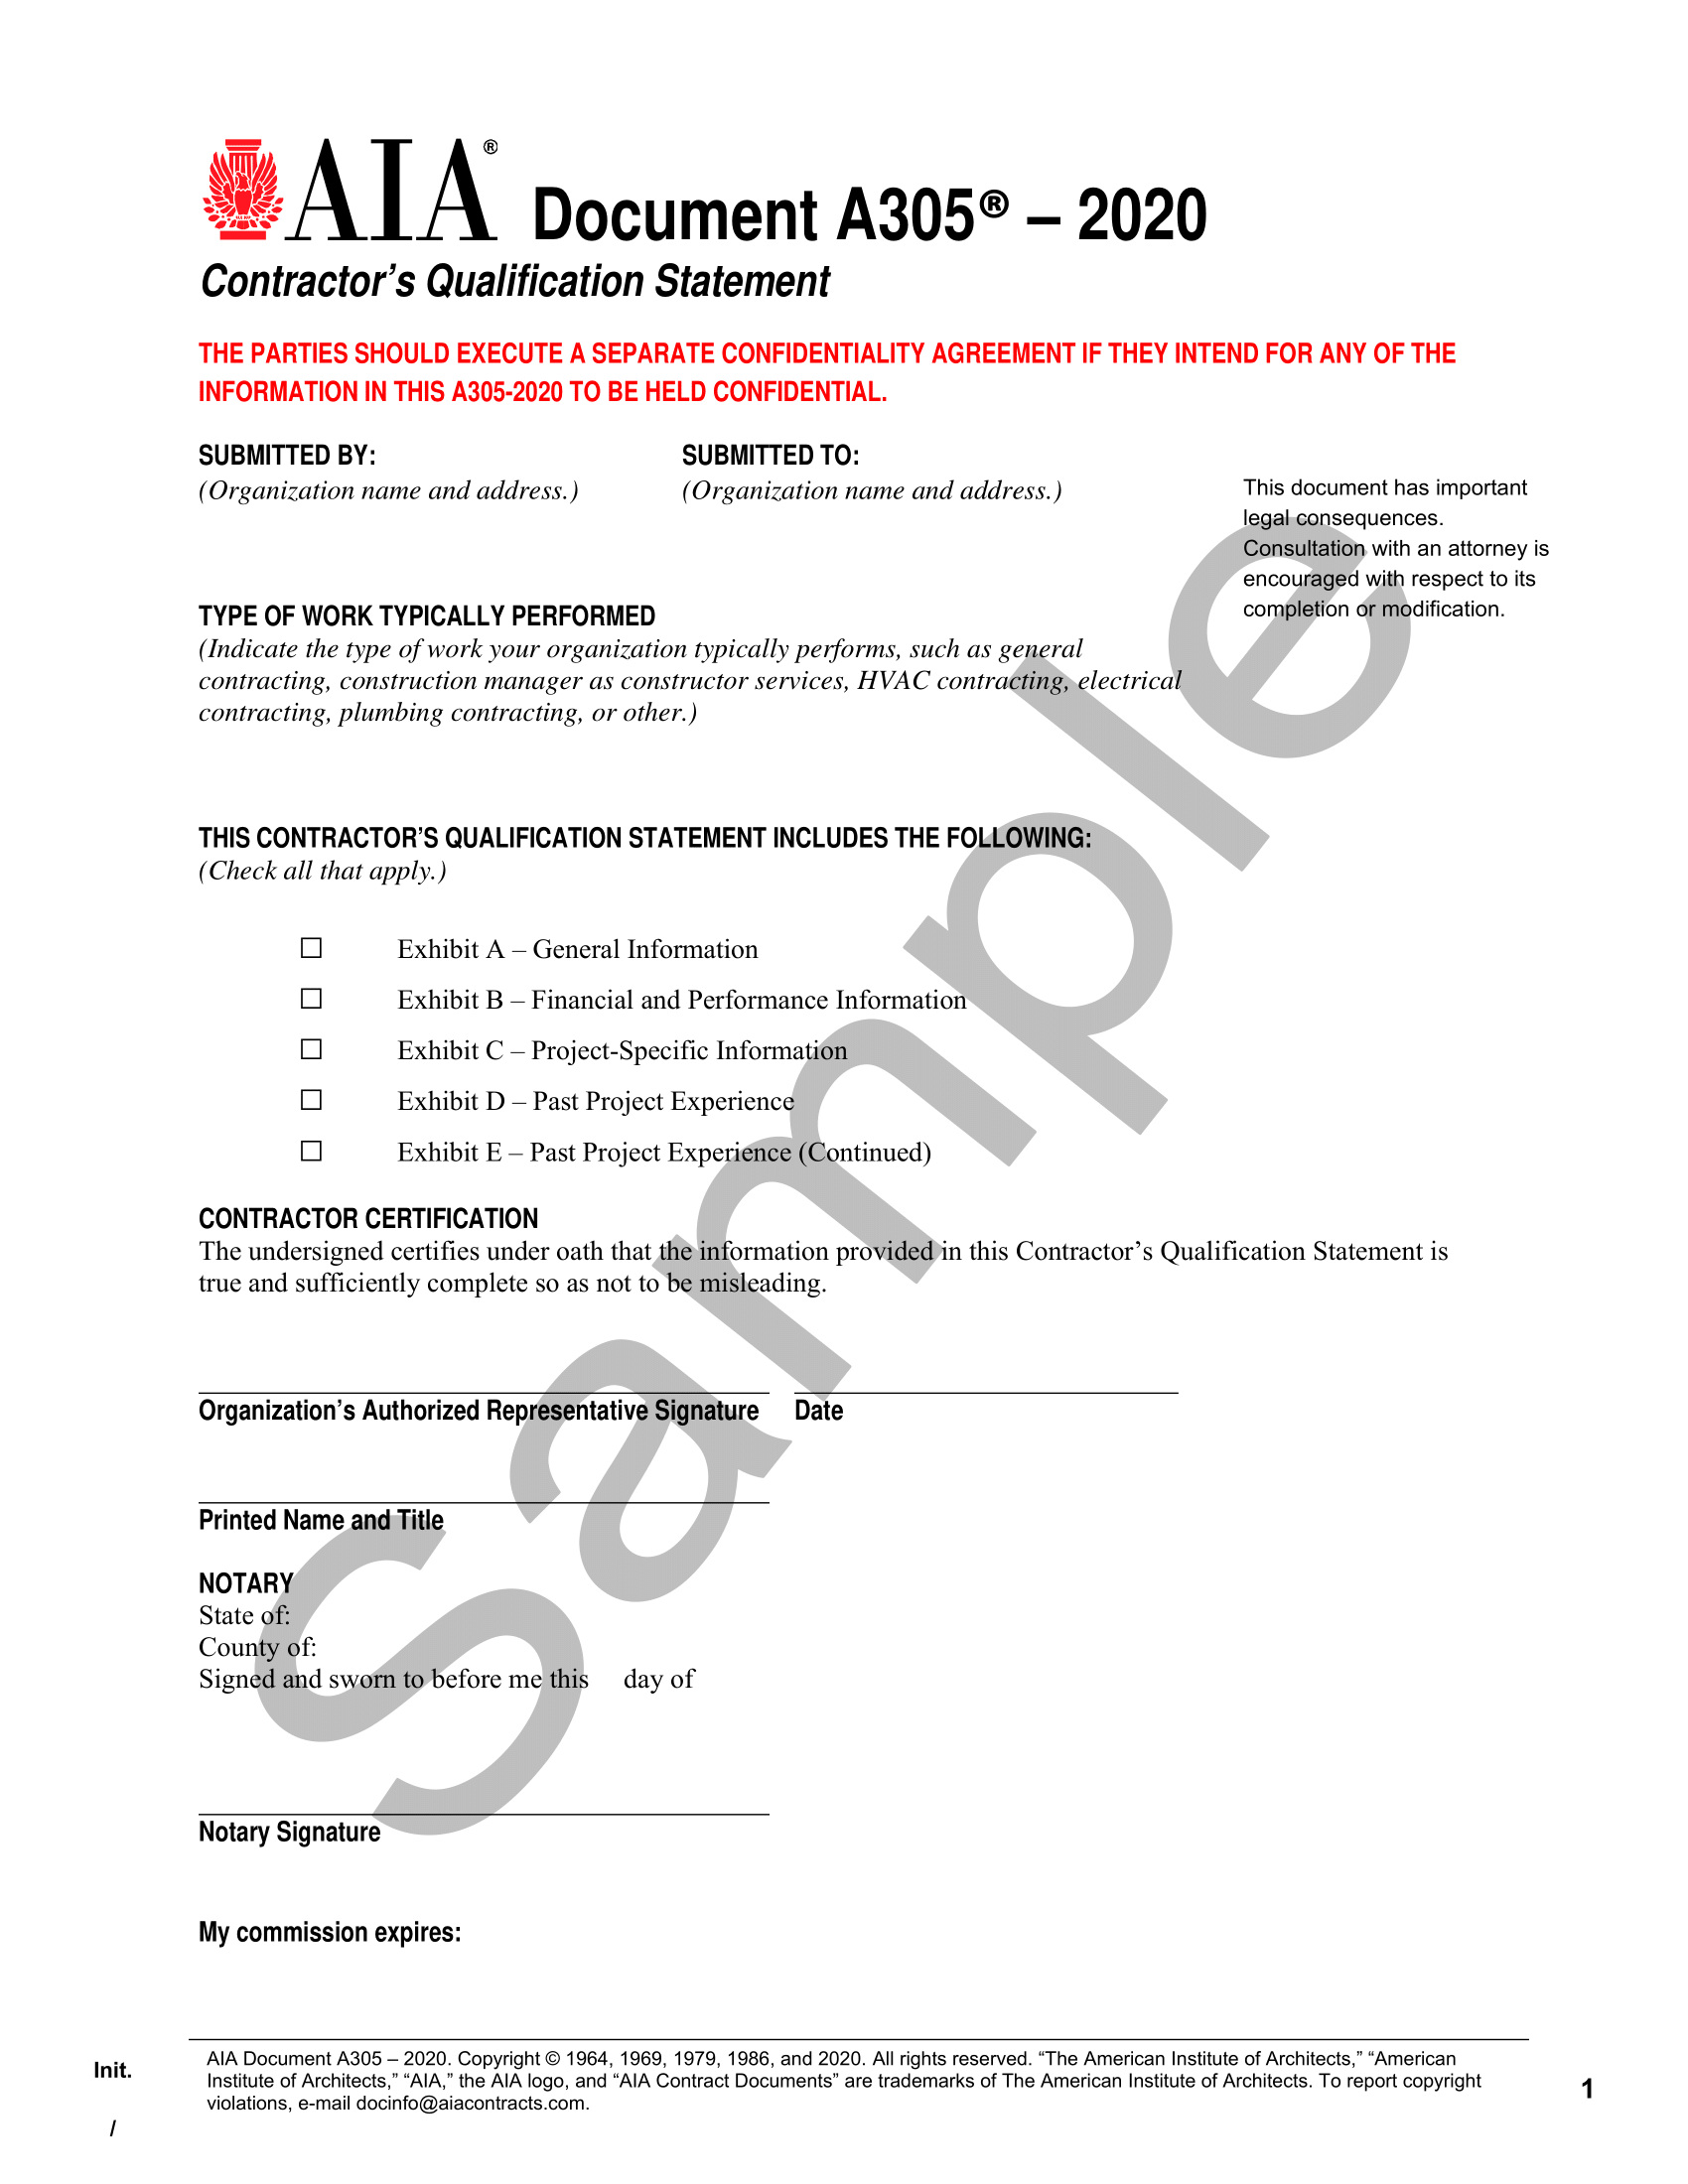 aia-a305-contractor-s-qualification-statement